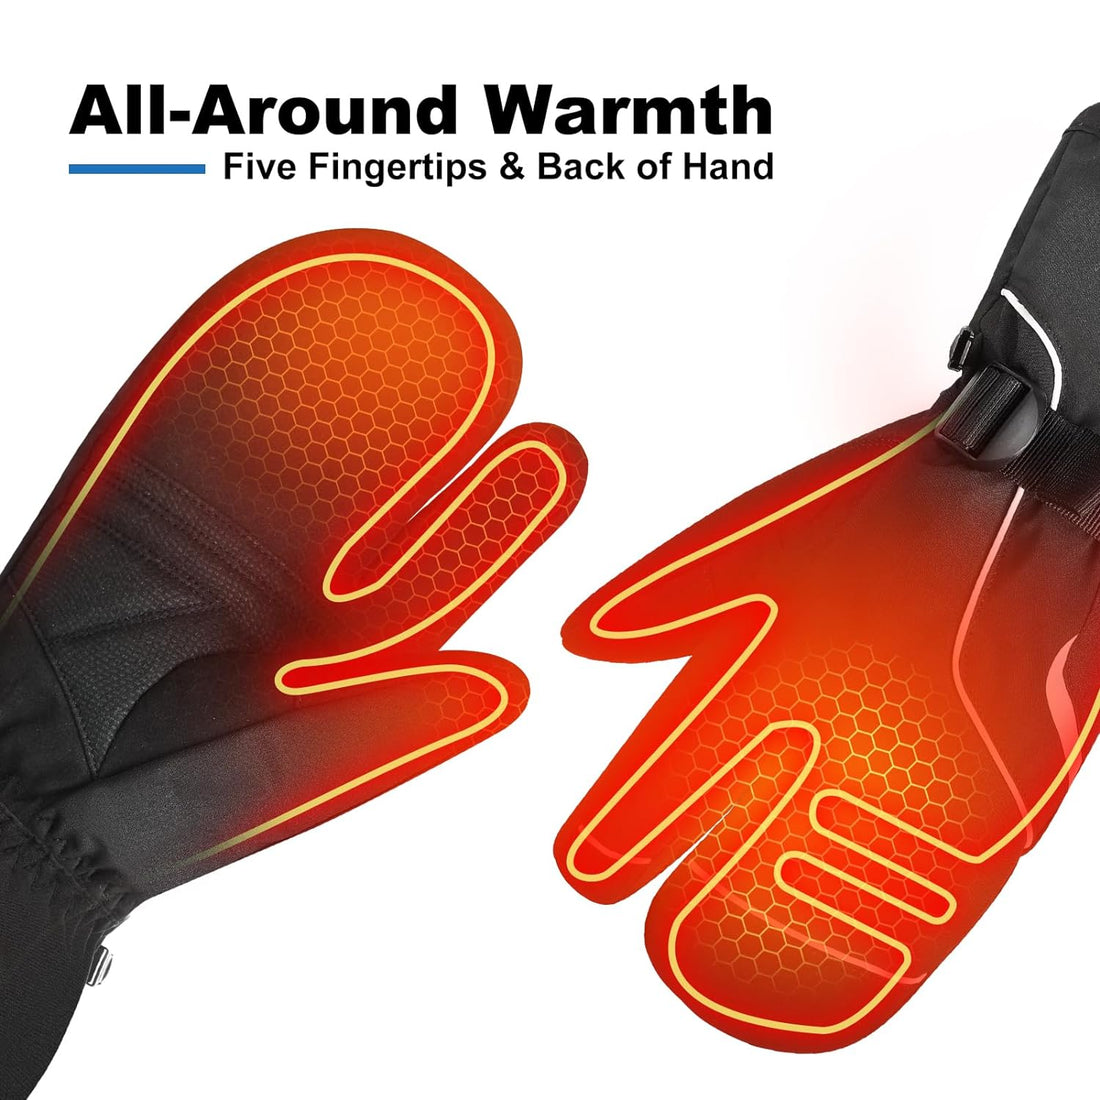 Heated Gloves, Winter Heating Gloves for Men Women,3-Finger Electric Rechargeable Battery Powered Touchscreen 3 Heating Levels Heated Gloves for Snowboarding Motorcycle Fishing Hiking Climbing